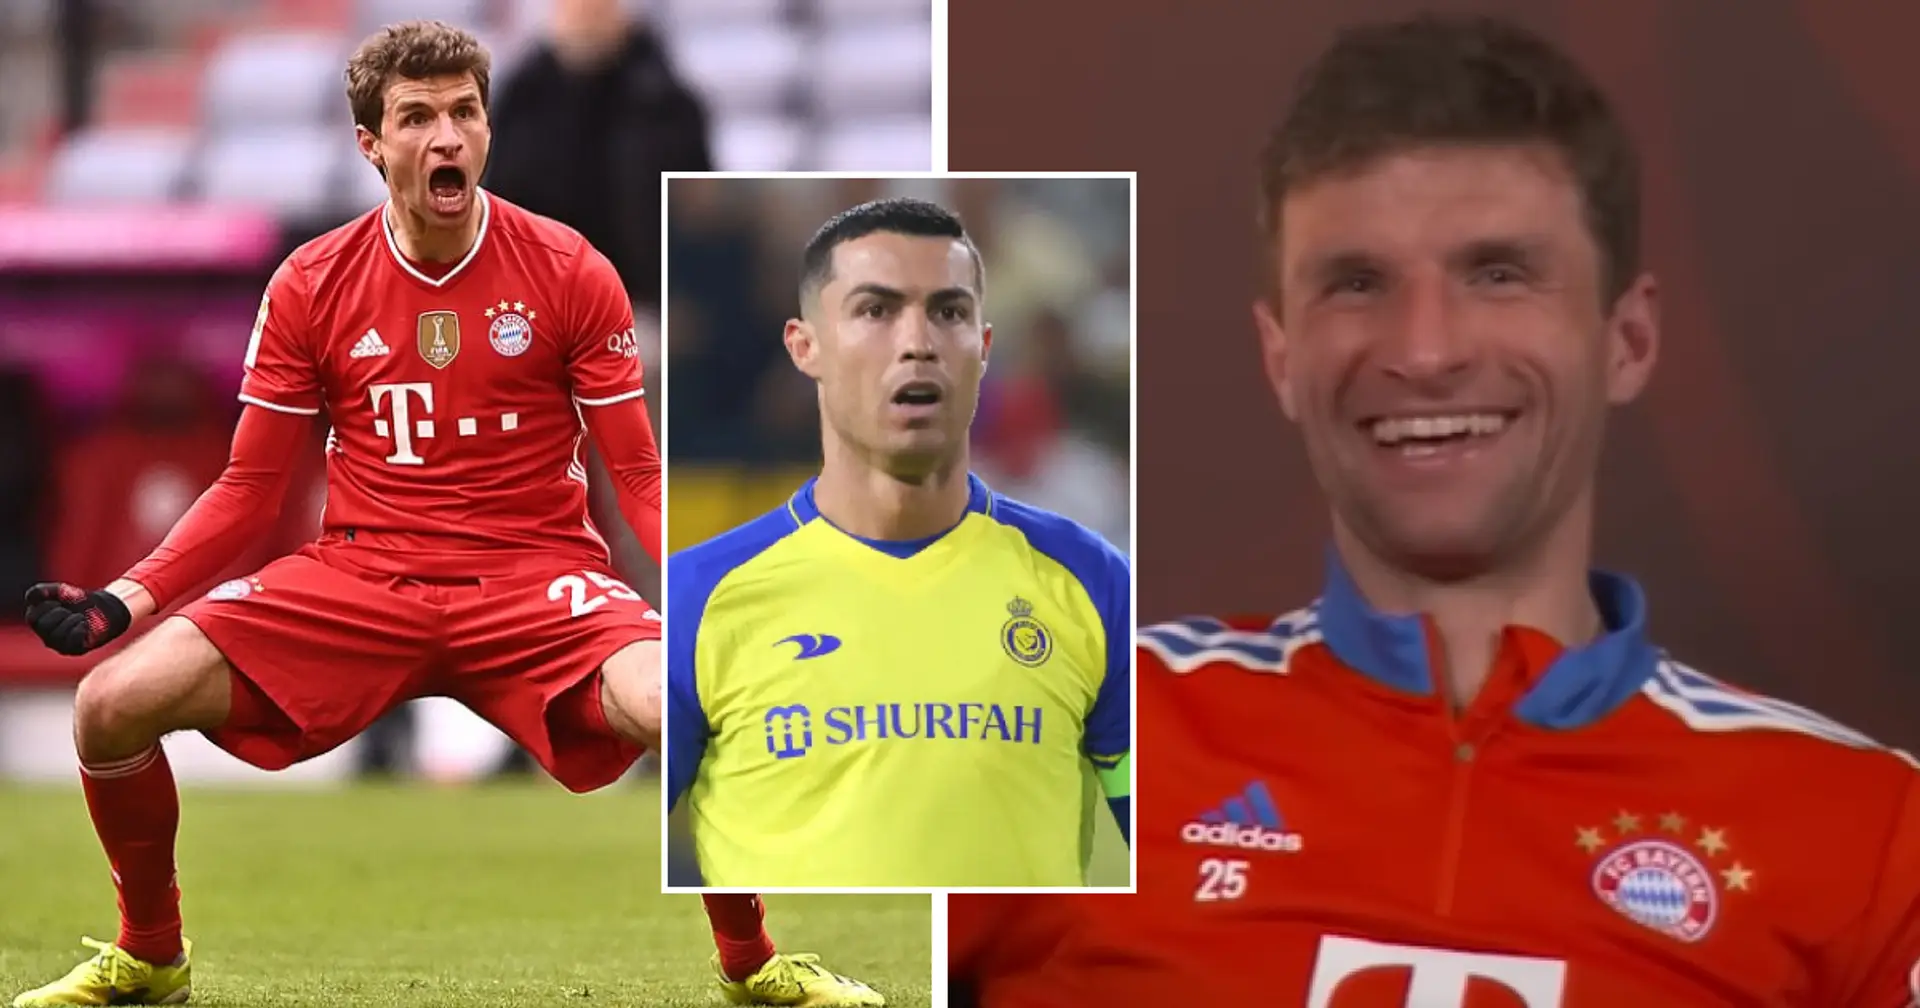 'I'm not done yet': Thomas Muller becomes third player in history to reach special milestone